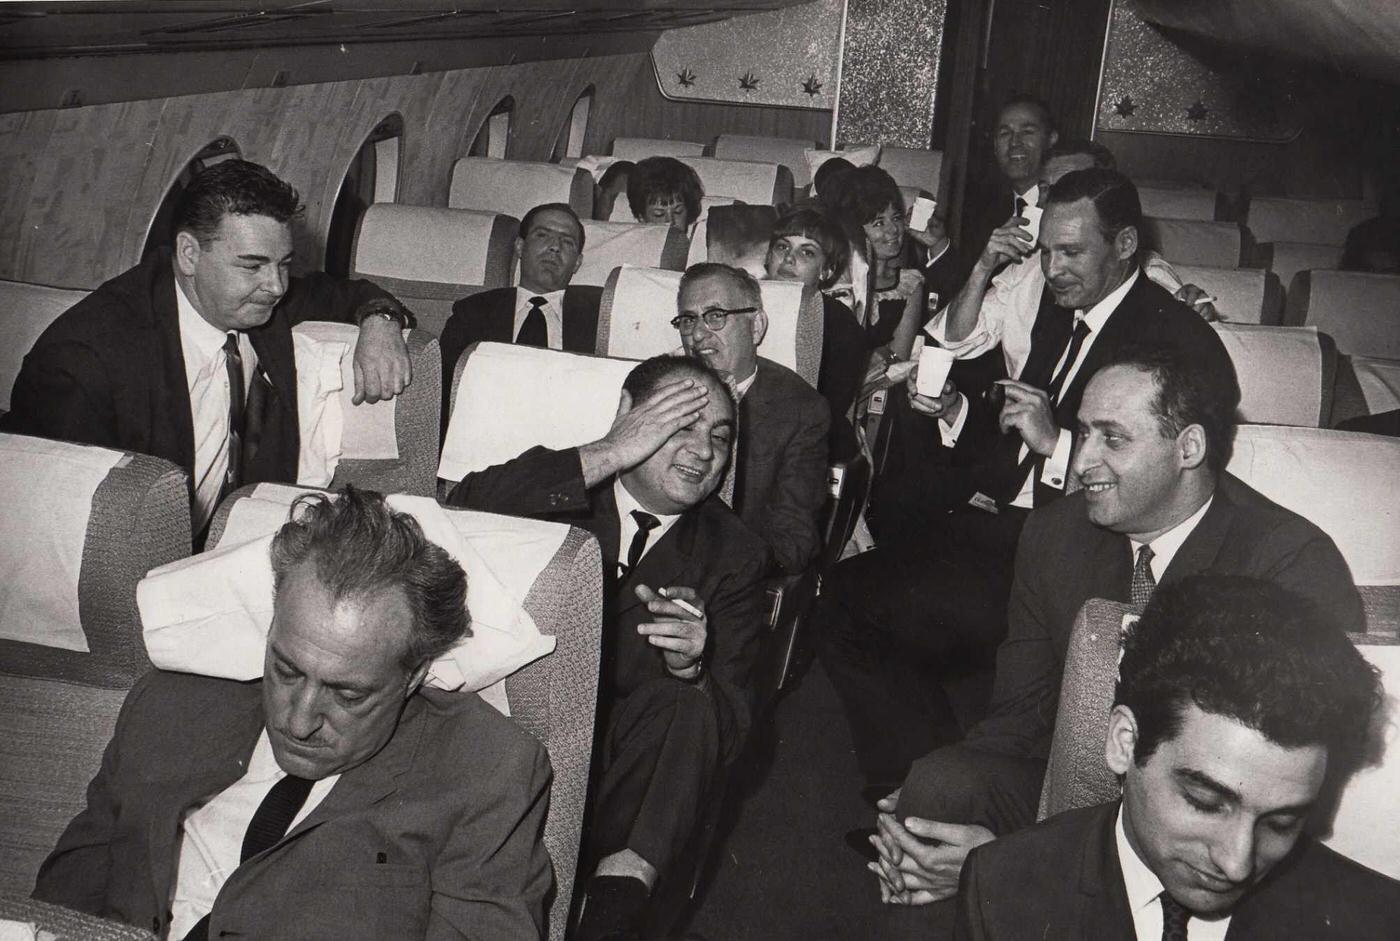 Passengers sitting on an Air Canada plane on the runway during the 1965 blackout in NYC. November 9, 1965.